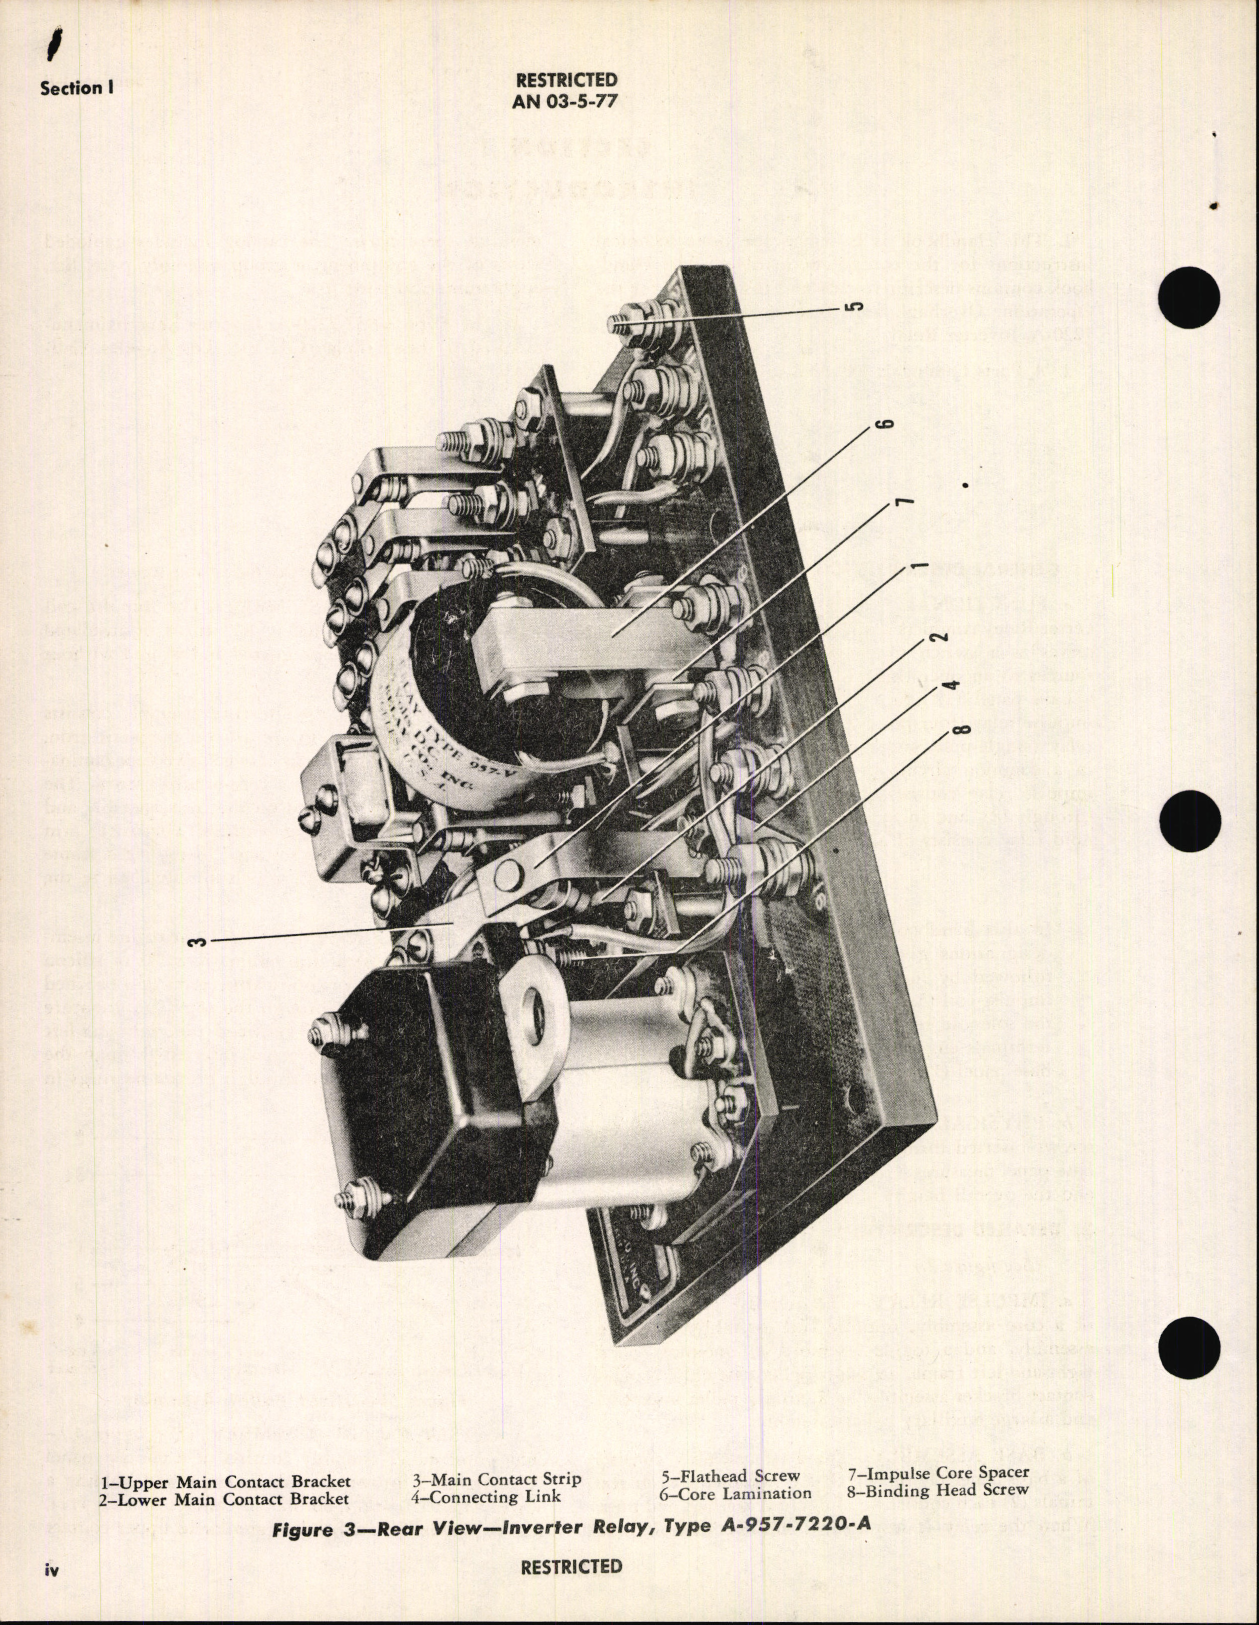 Sample page 6 from AirCorps Library document: Overhaul Instructions with Parts Catalog for Inverter Relay A-957-7220-A